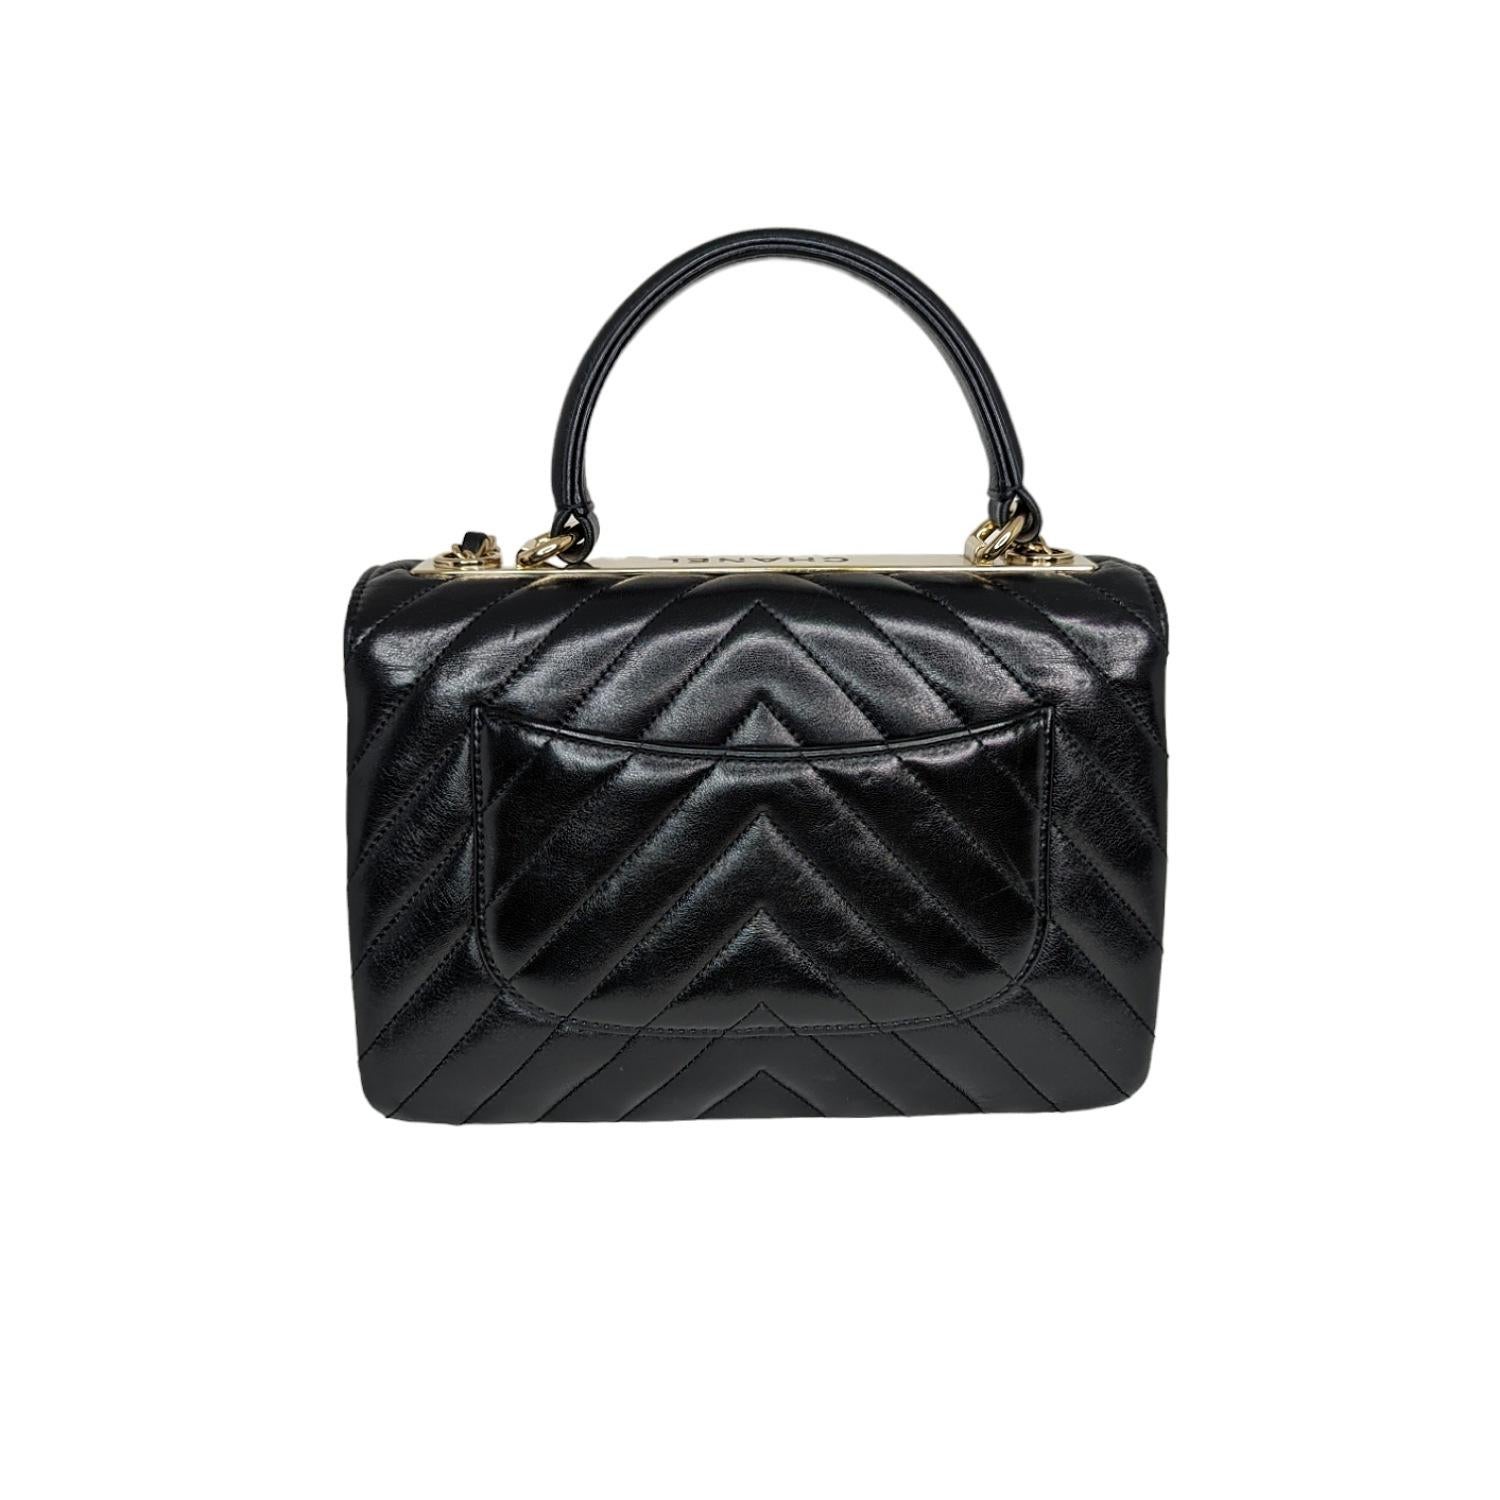 This stylish handbag is crafted of chevron-quilted lambskin leather in black. The iconic CC turn-lock in gold-tone hardware at front face. The back of the bag has an easy slip pocket, and the interior has spacious compartments to hold your